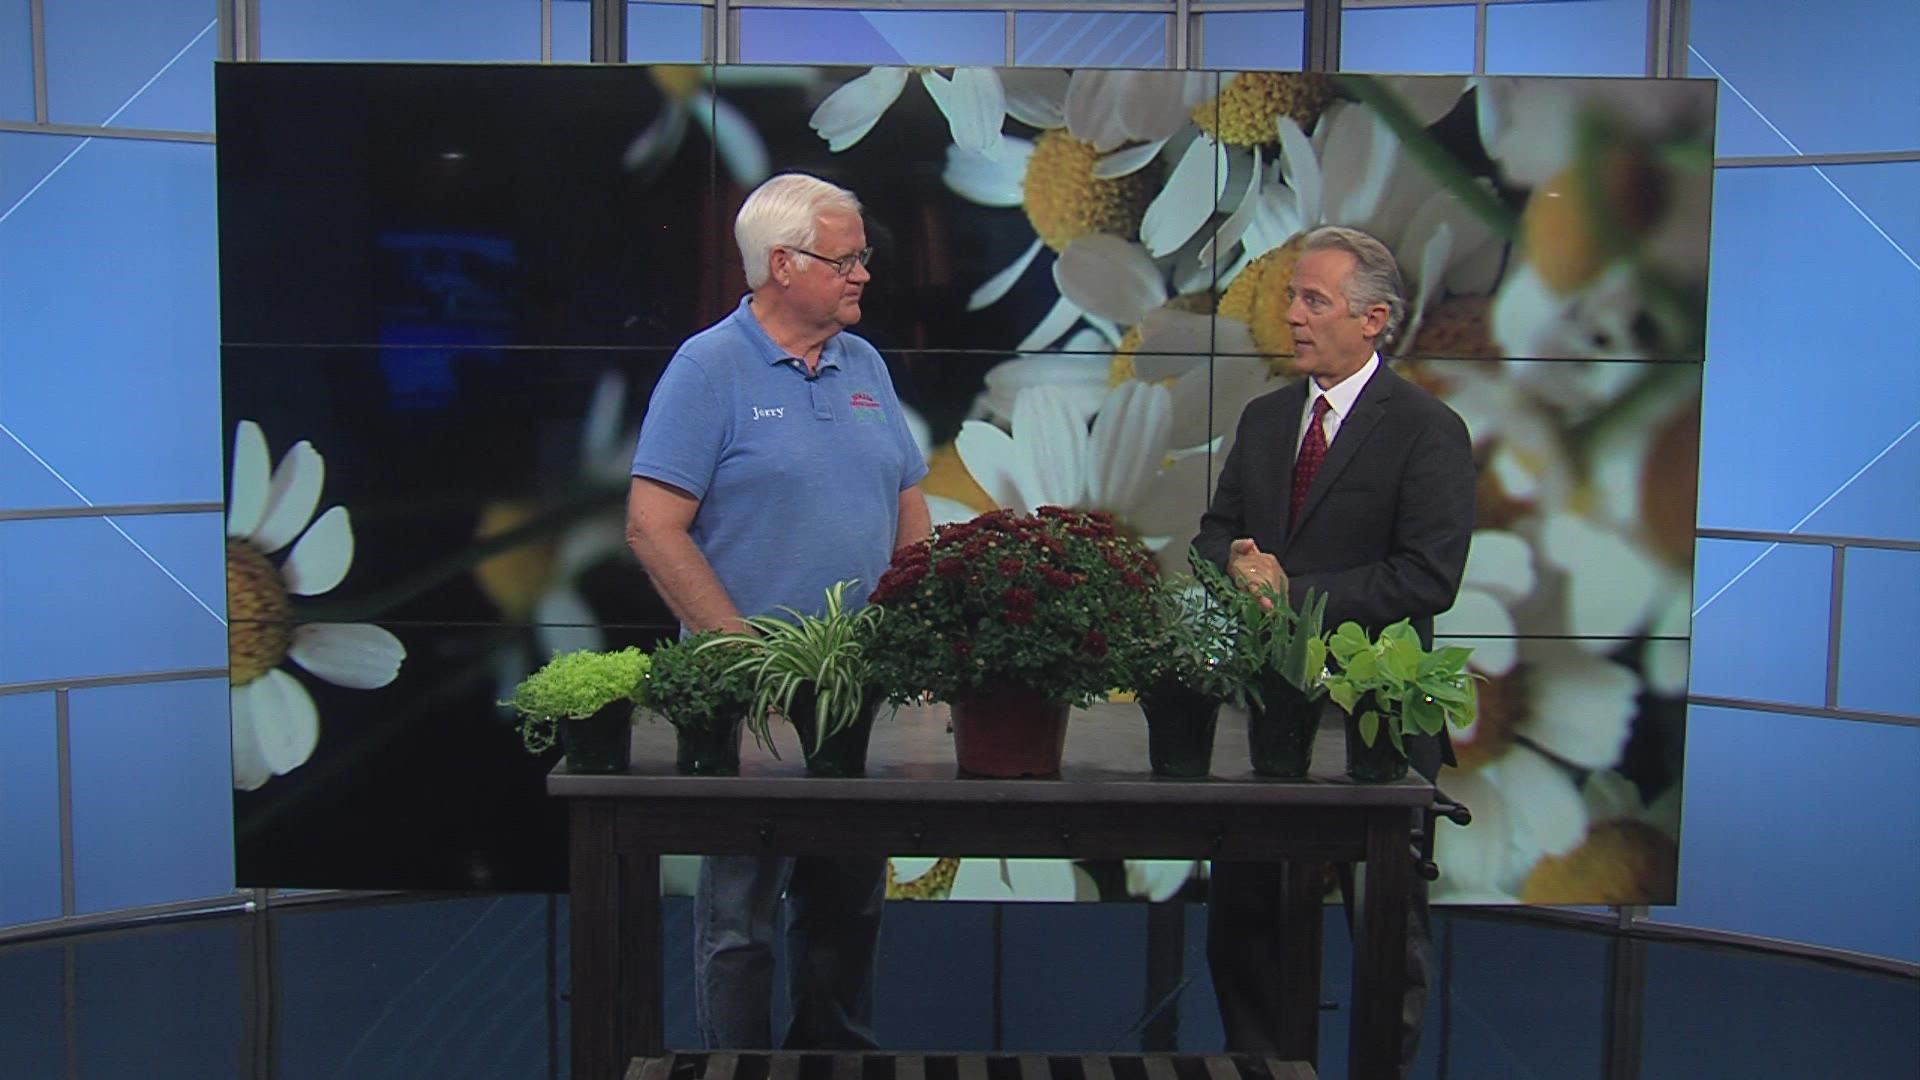 Join Jerry at Holub Greenhouse to purchase all your plants for fall, including seasonal mums and houseplants.